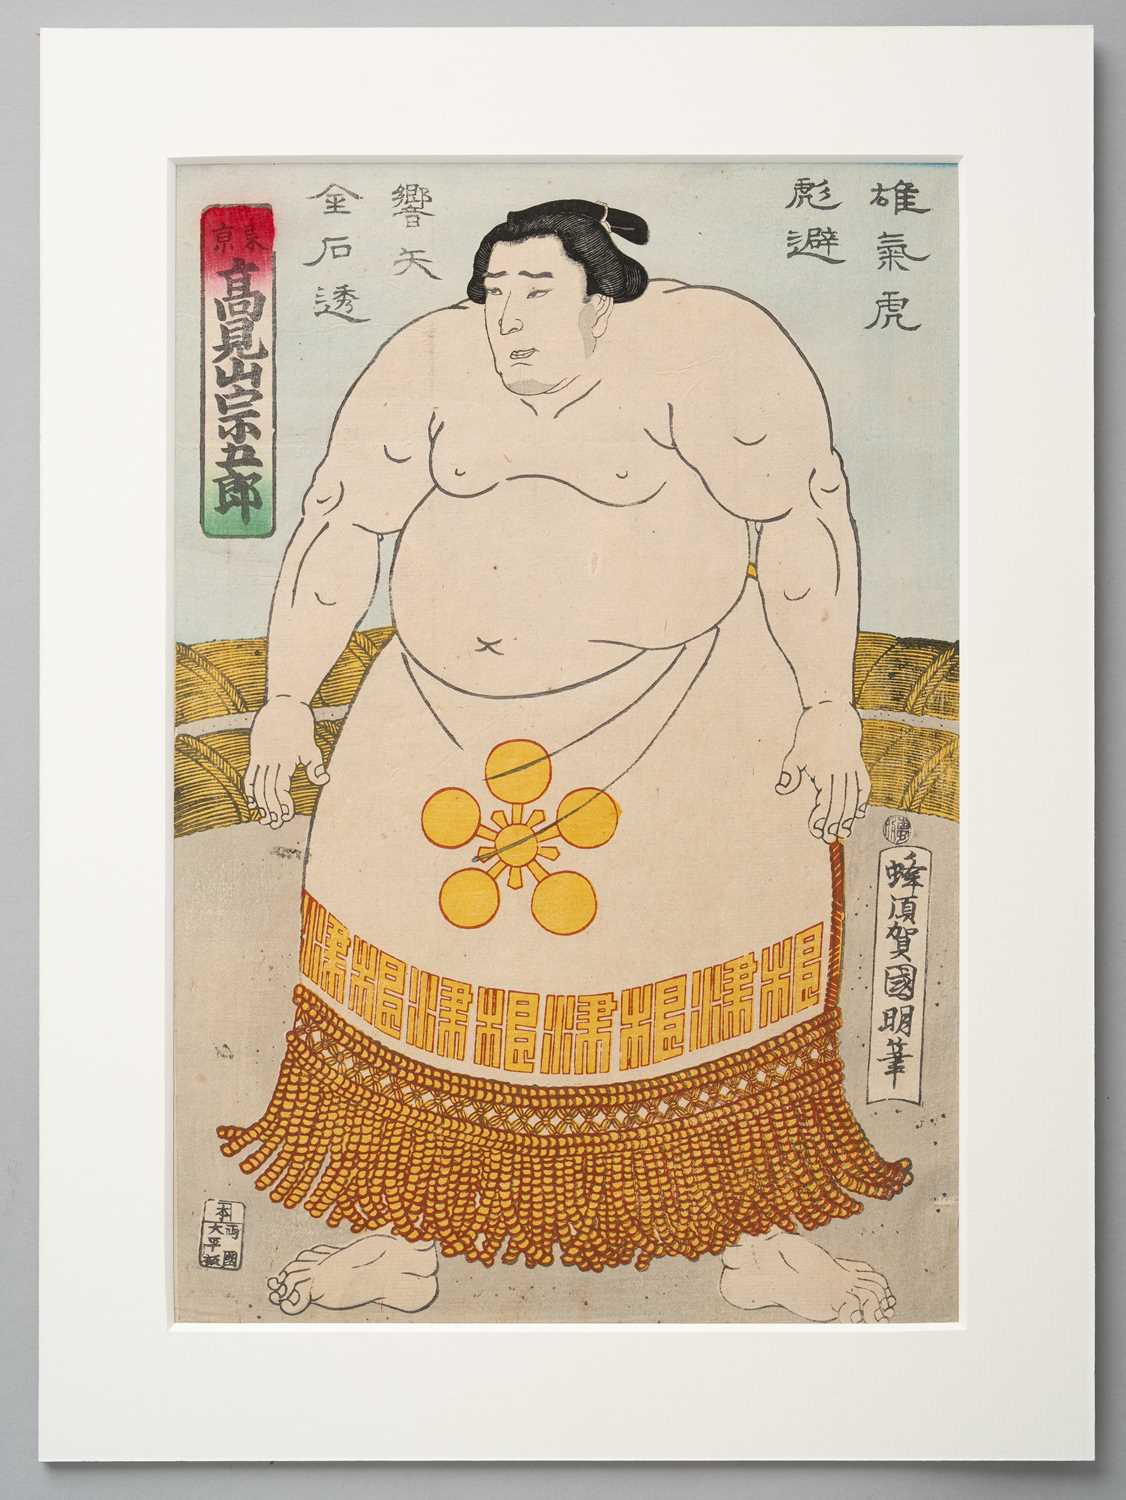 NO RESERVE UNIDENTIFIED ARTISTS SUMO-E (PORTRAITS OF SUMO WRESTLERS) EDO OR MEIJI, 19TH CENTURY A - Image 7 of 9